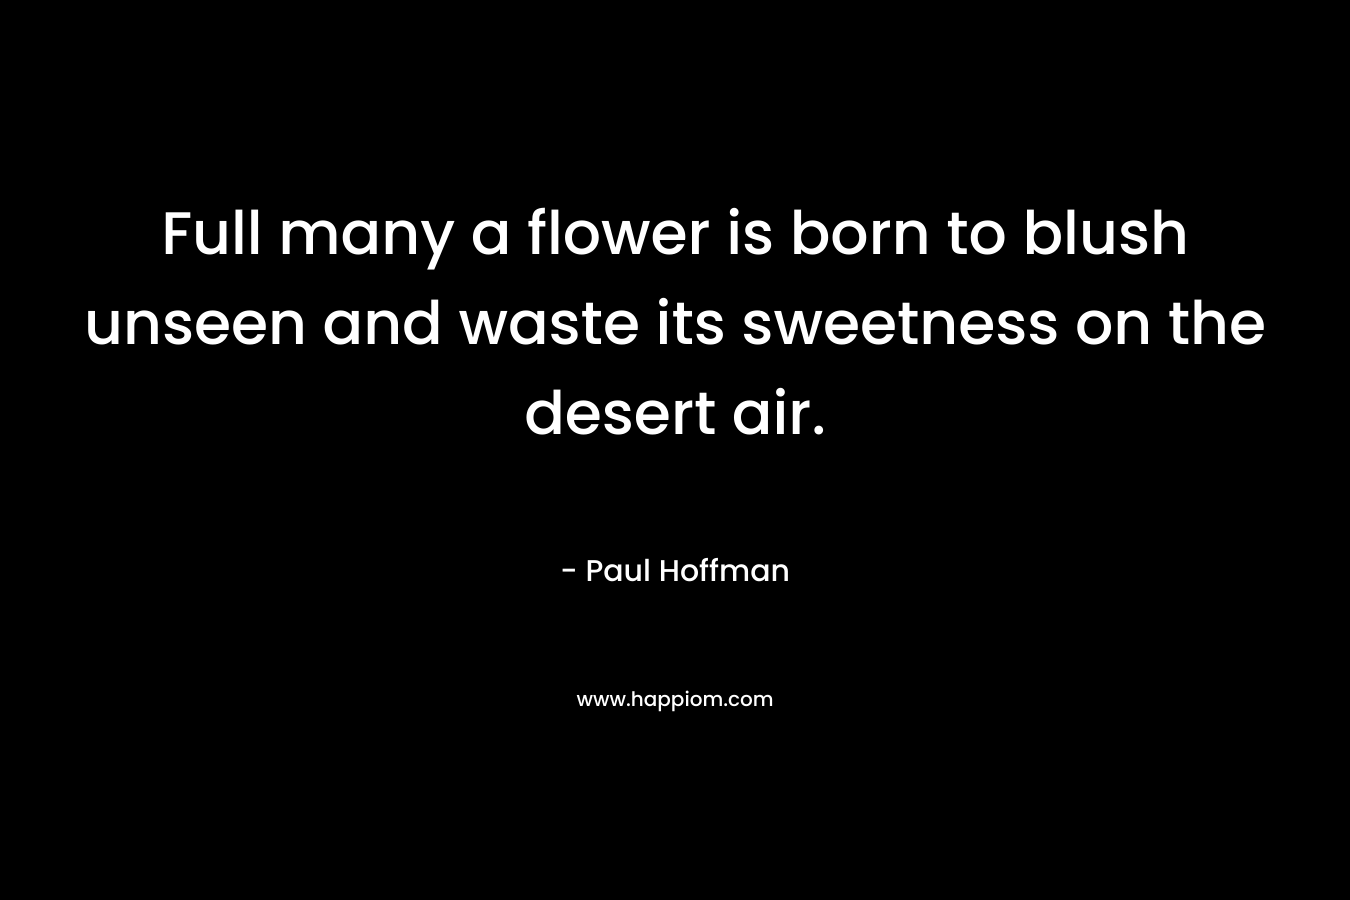 Full many a flower is born to blush unseen and waste its sweetness on the desert air.